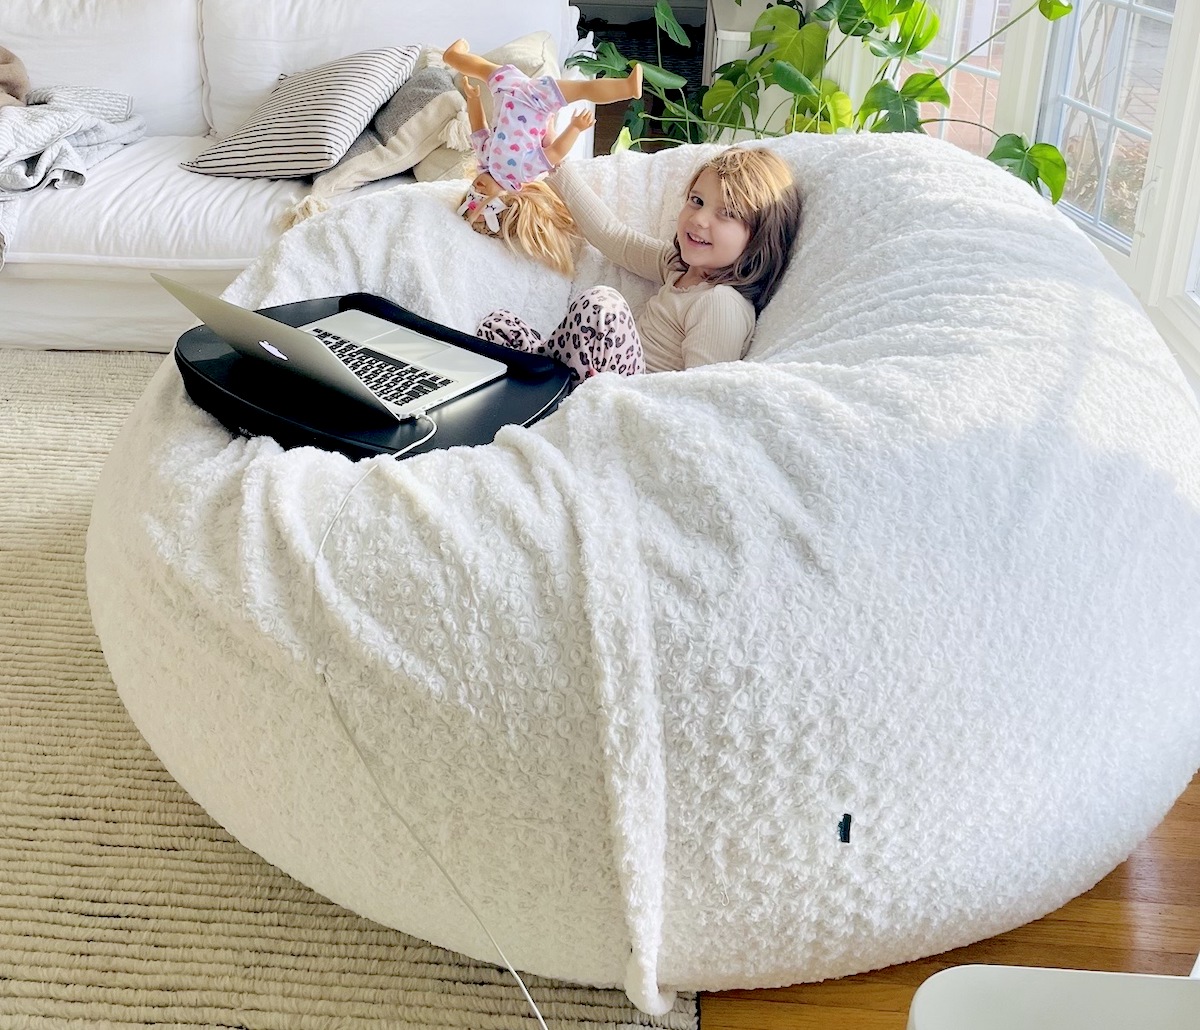 7ft Ultimate Large Fur Giant Bean Bag Cozy Chilled Bed,Chair,Sofa,Couch Adult 